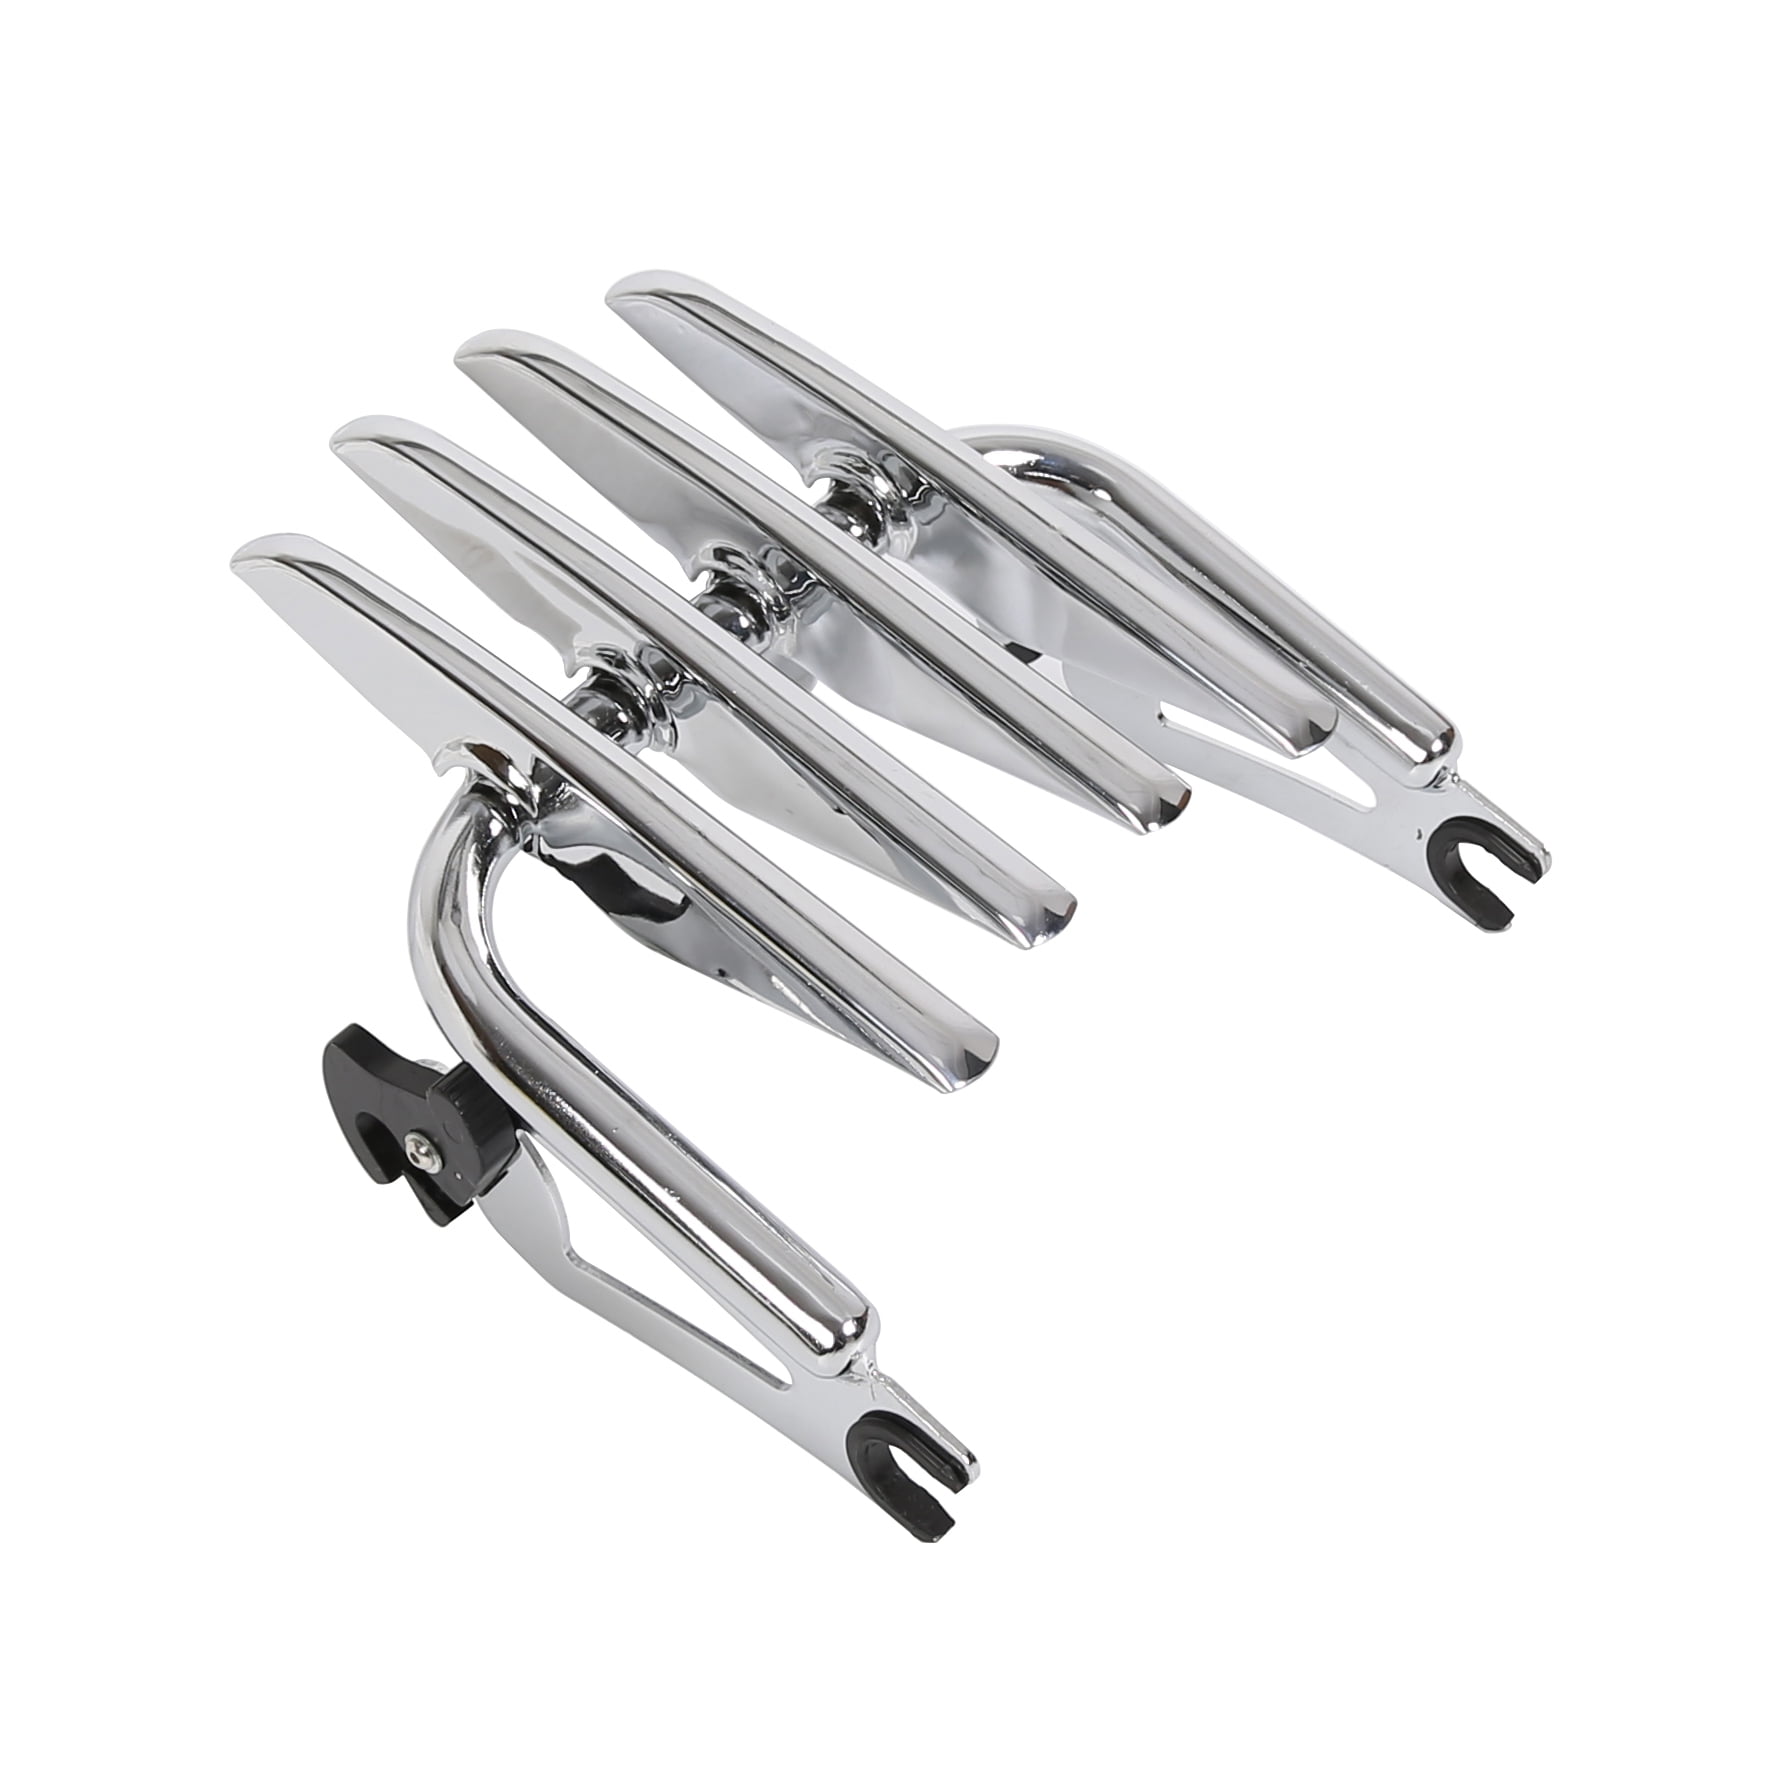 Chrome Detachable Stealth Luggage Rack Fit for Harley Electra Street Glide 09-Up 